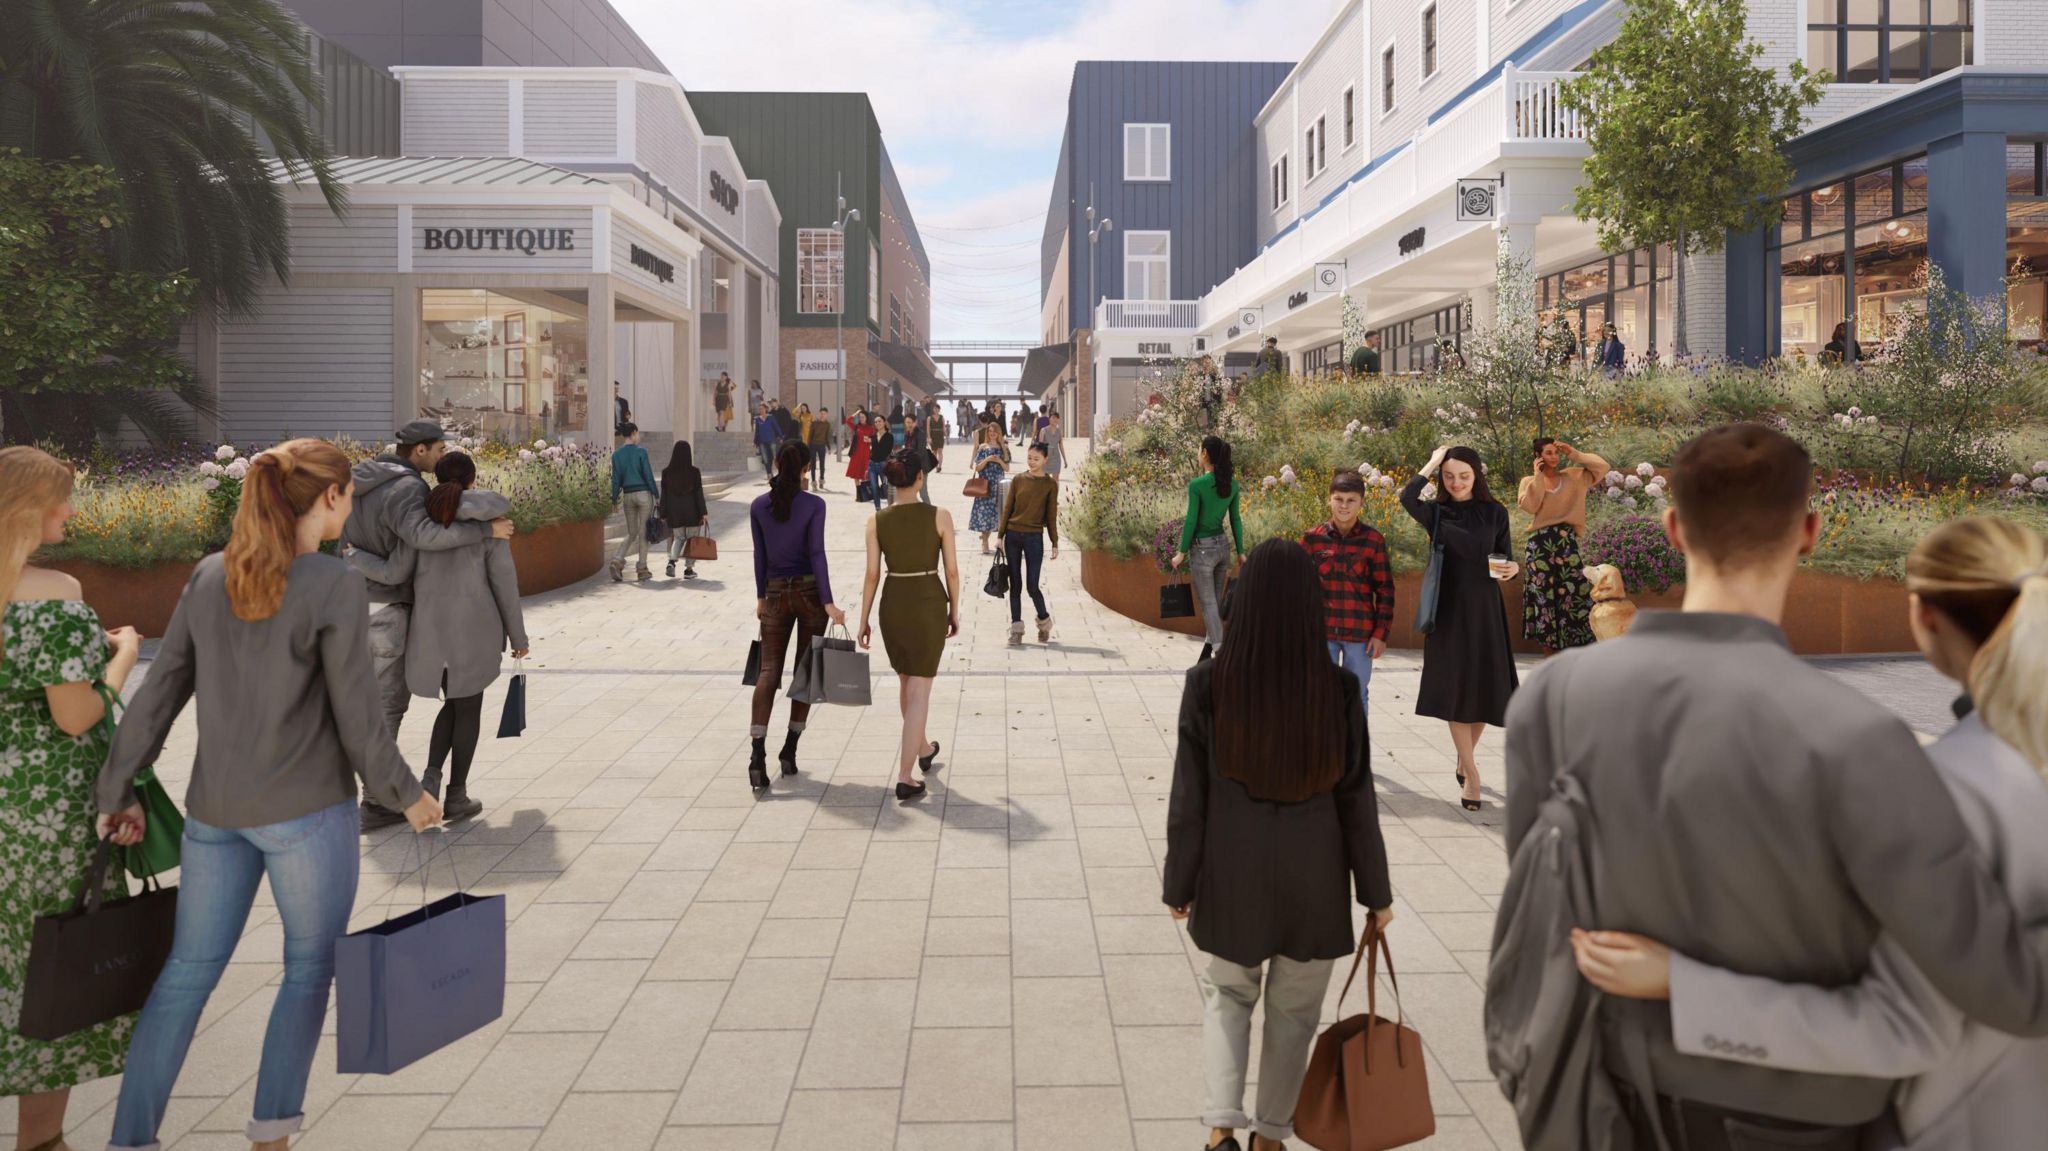 A cgi image of the new gunwharf quays plans. It shows people with shopping bags, boutique shops, and space for plants and greenery